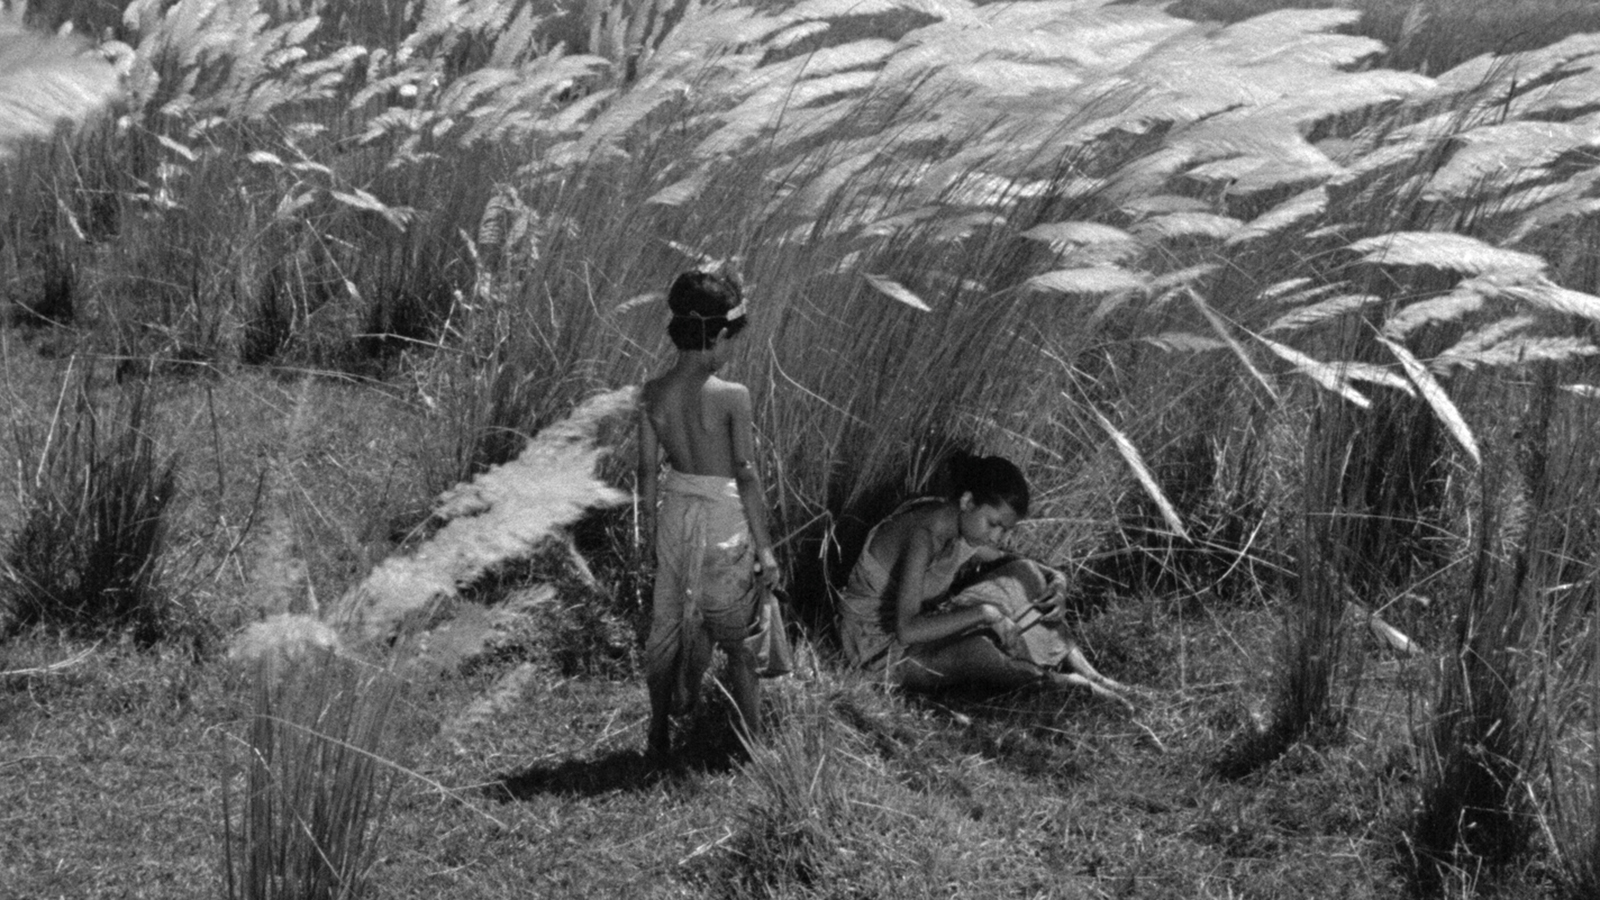 A wrinkled face, artistes without make-up: Adoor recalls first impression of watching ‘Pather Panchali’